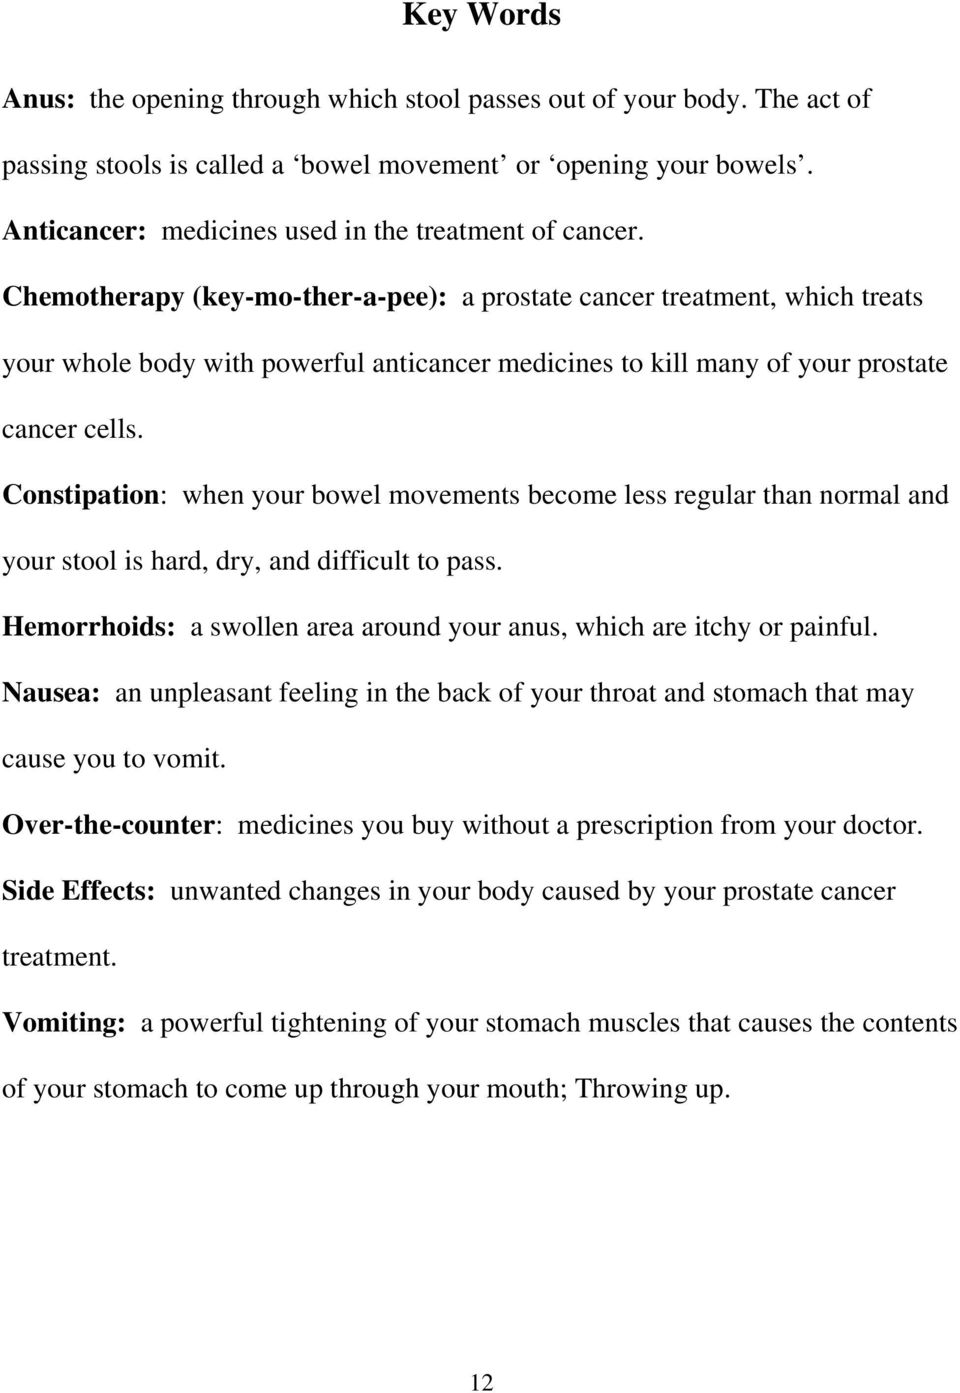 Chemotherapy (key-mo-ther-a-pee): a prostate cancer treatment, which treats your whole body with powerful anticancer medicines to kill many of your prostate cancer cells.